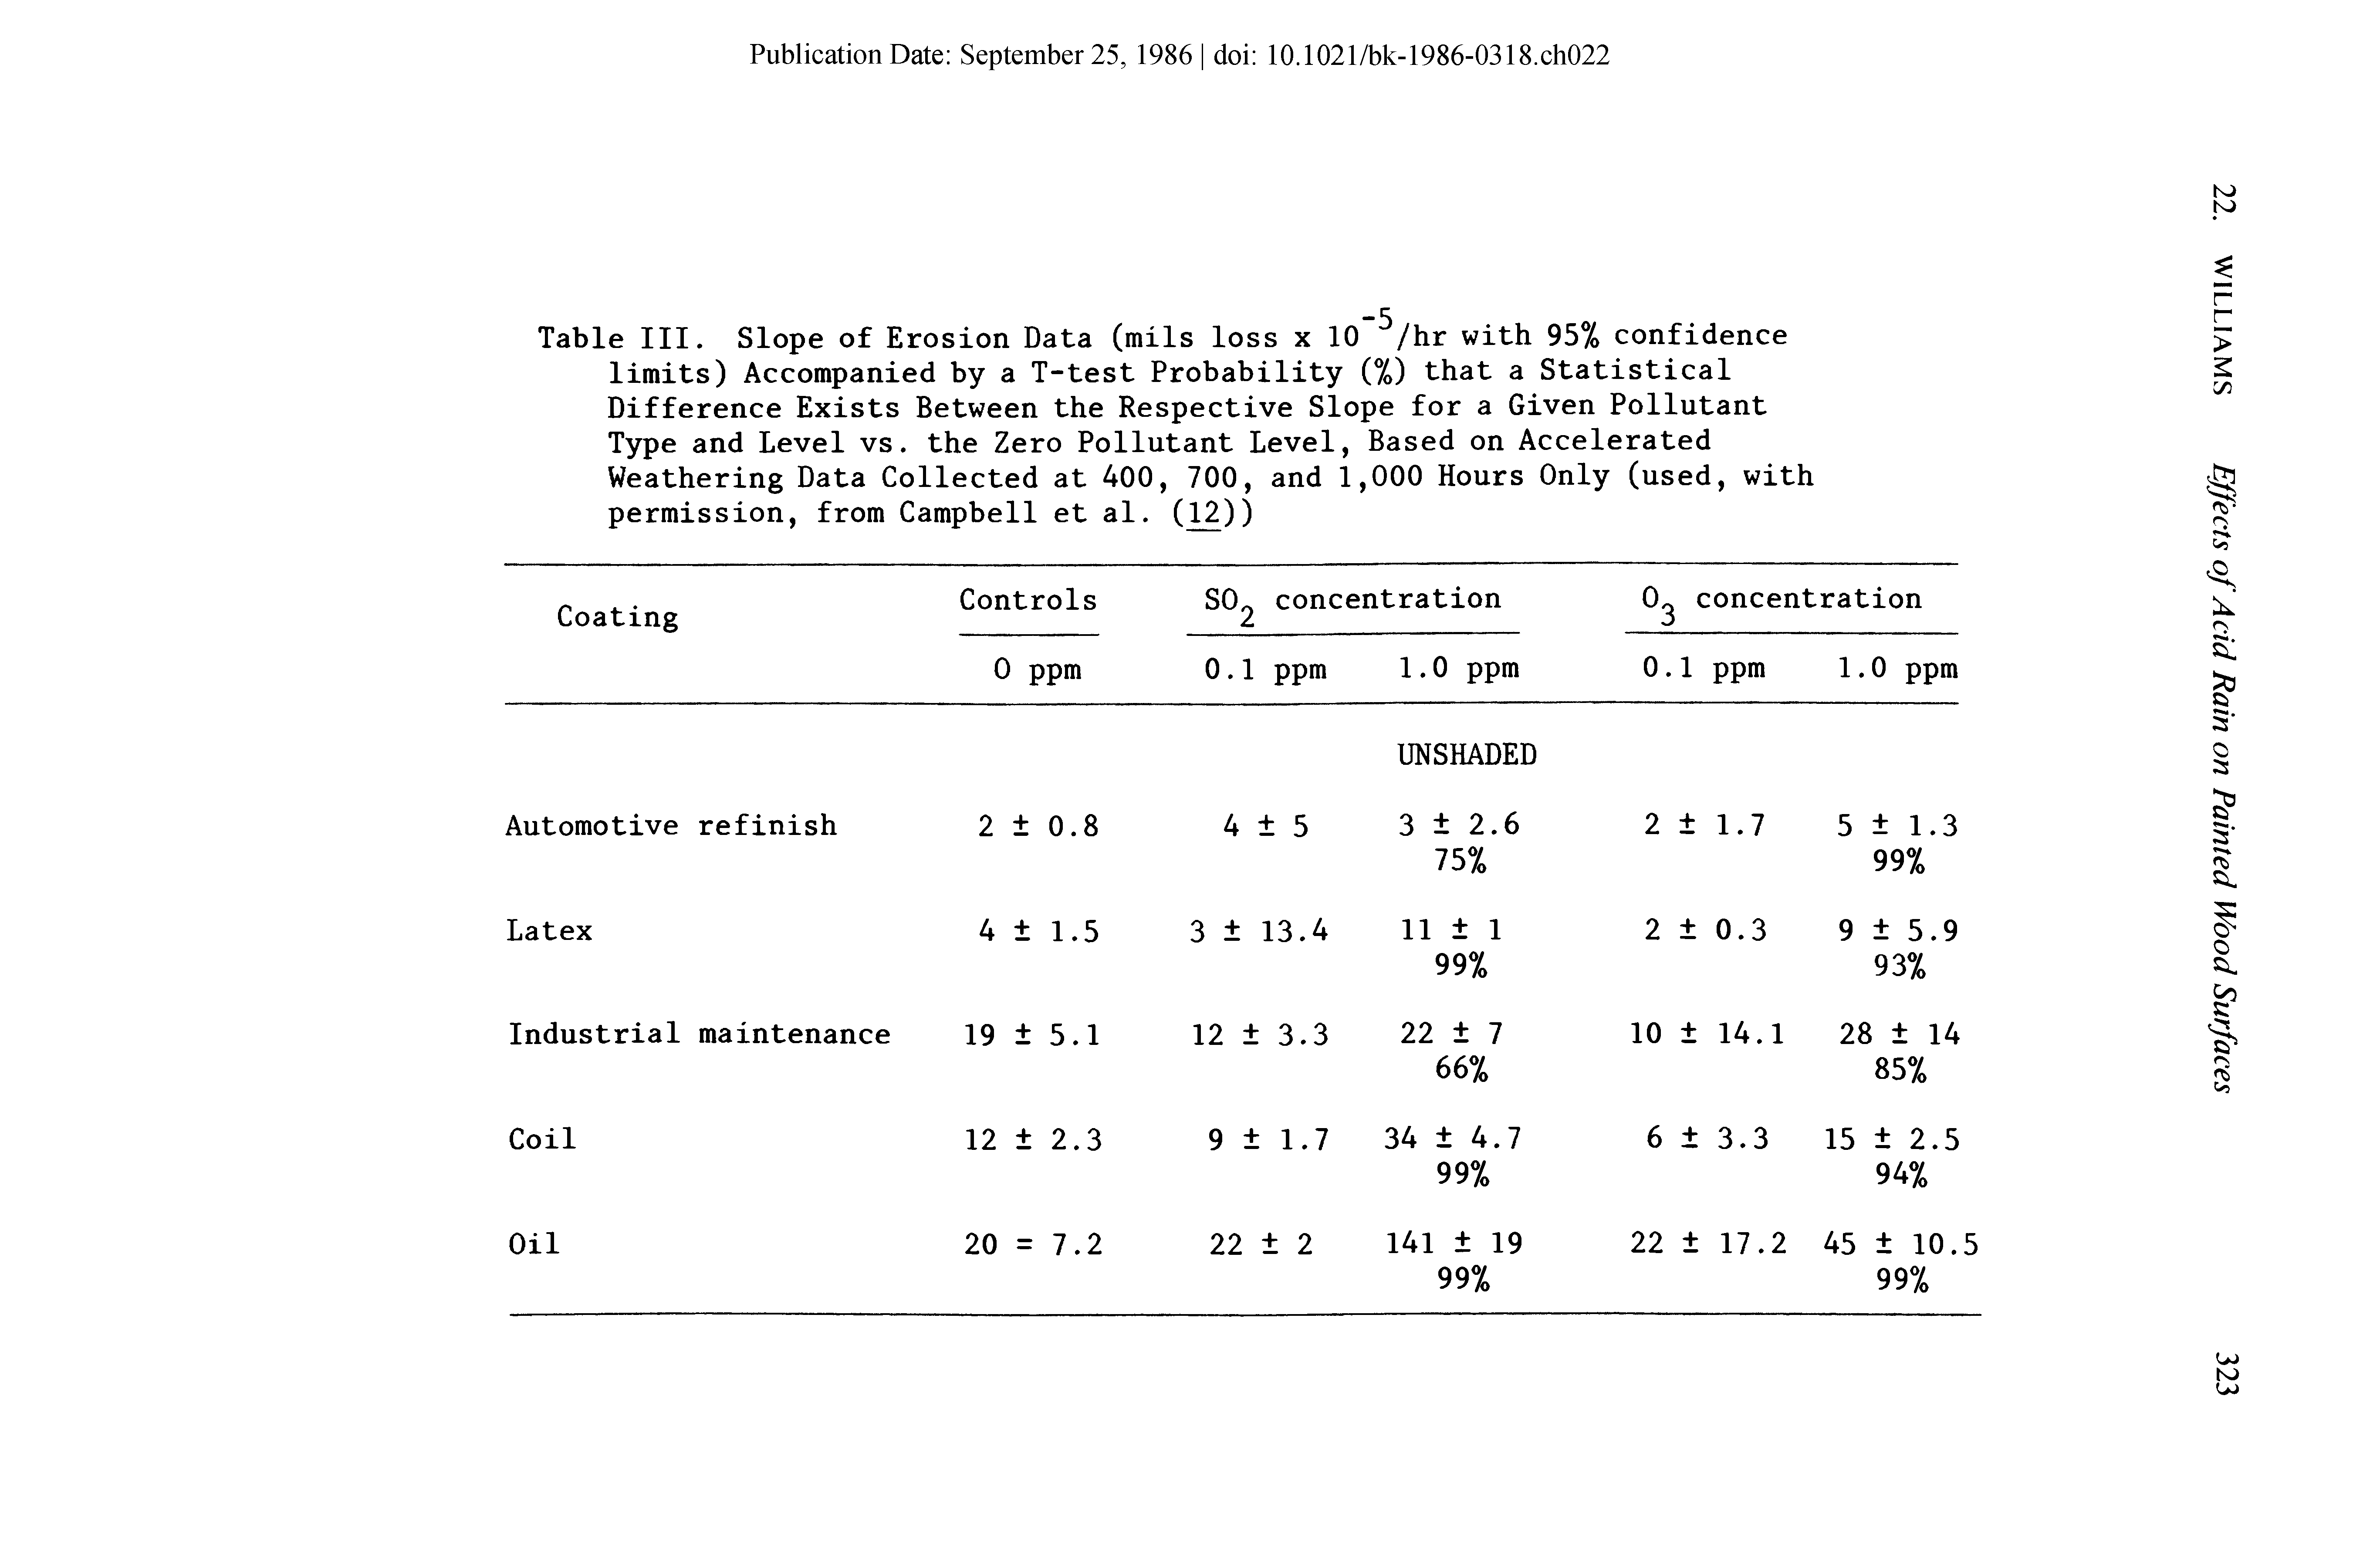 Table III. Slope of Erosion Data (mils loss x 10 /hr with 95% confidence limits) Accompanied by a T-test Probability (%) that a Statistical Difference Exists Between the Respective Slope for a Given Pollutant Type and Level vs. the Zero Pollutant Level, Based on Accelerated Weathering Data Collected at 400, 700, and 1,000 Hours Only (used, with permission, from Campbell et al. (12))...